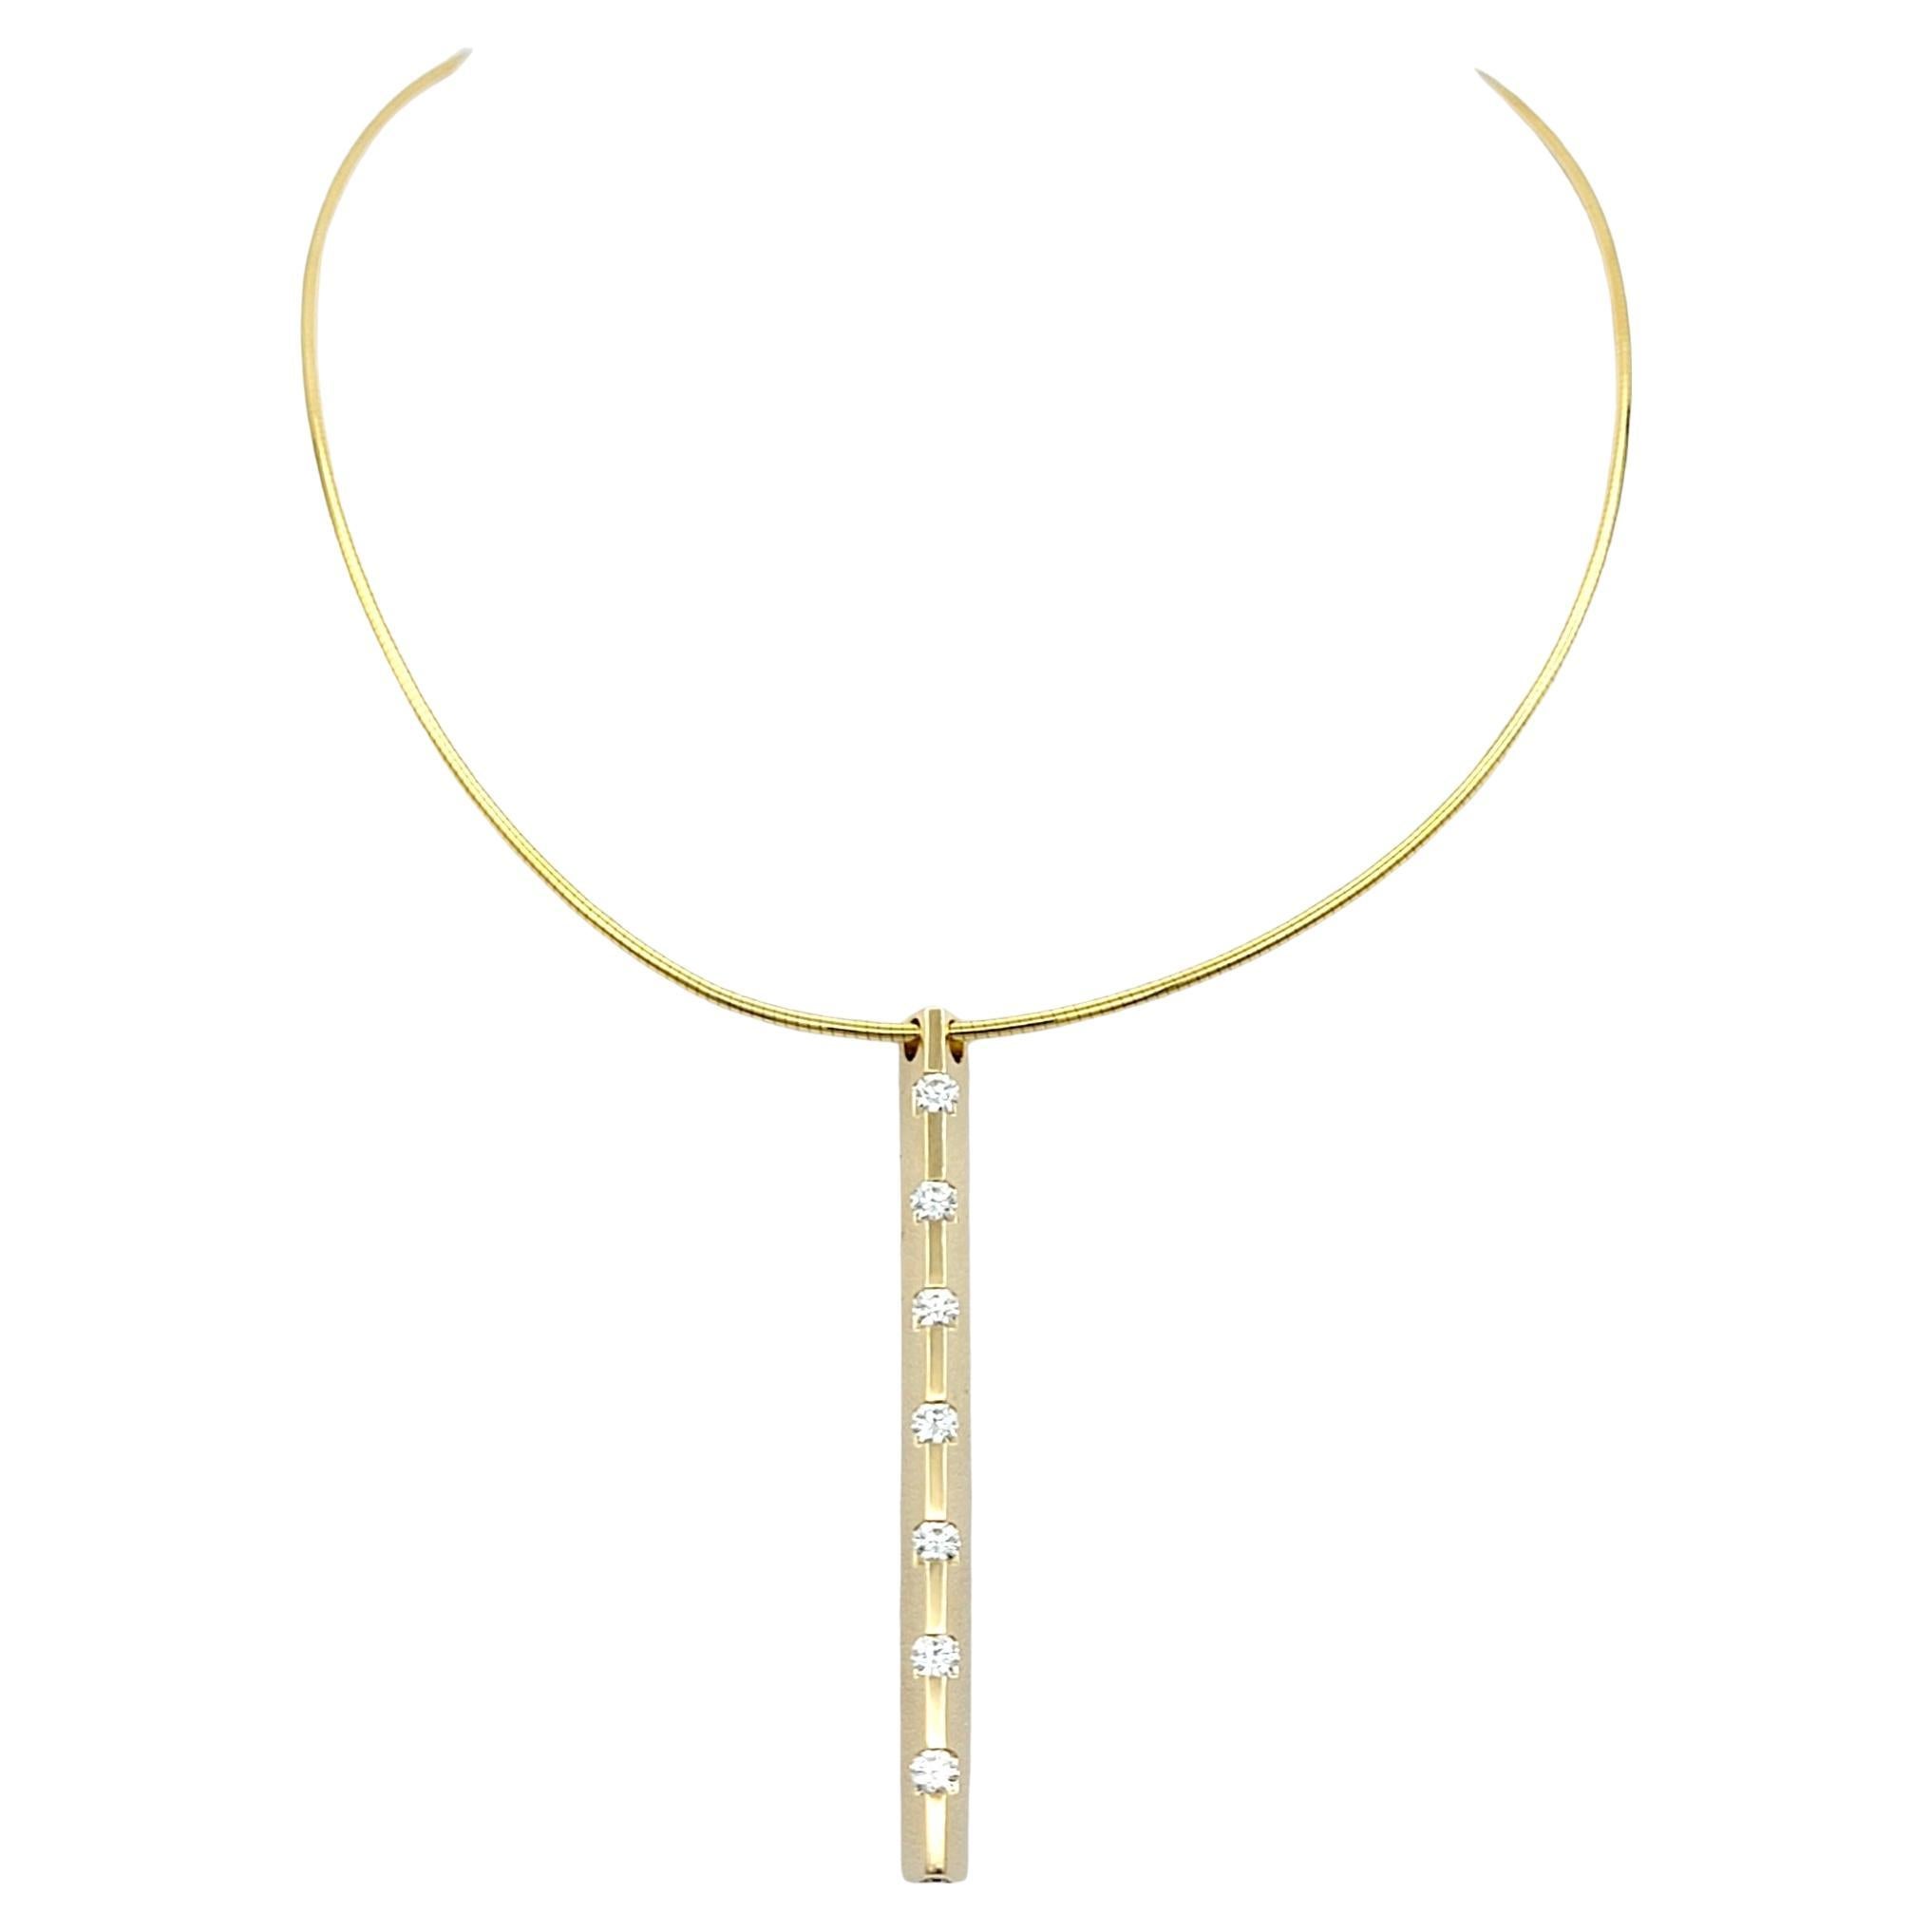 This chic and sophisticated Scott Gauthier necklace is a stunning piece of jewelry that effortlessly blends contemporary style with timeless elegance. With its minimalist design and exquisite diamond embellishments, it's a timeless accessory that